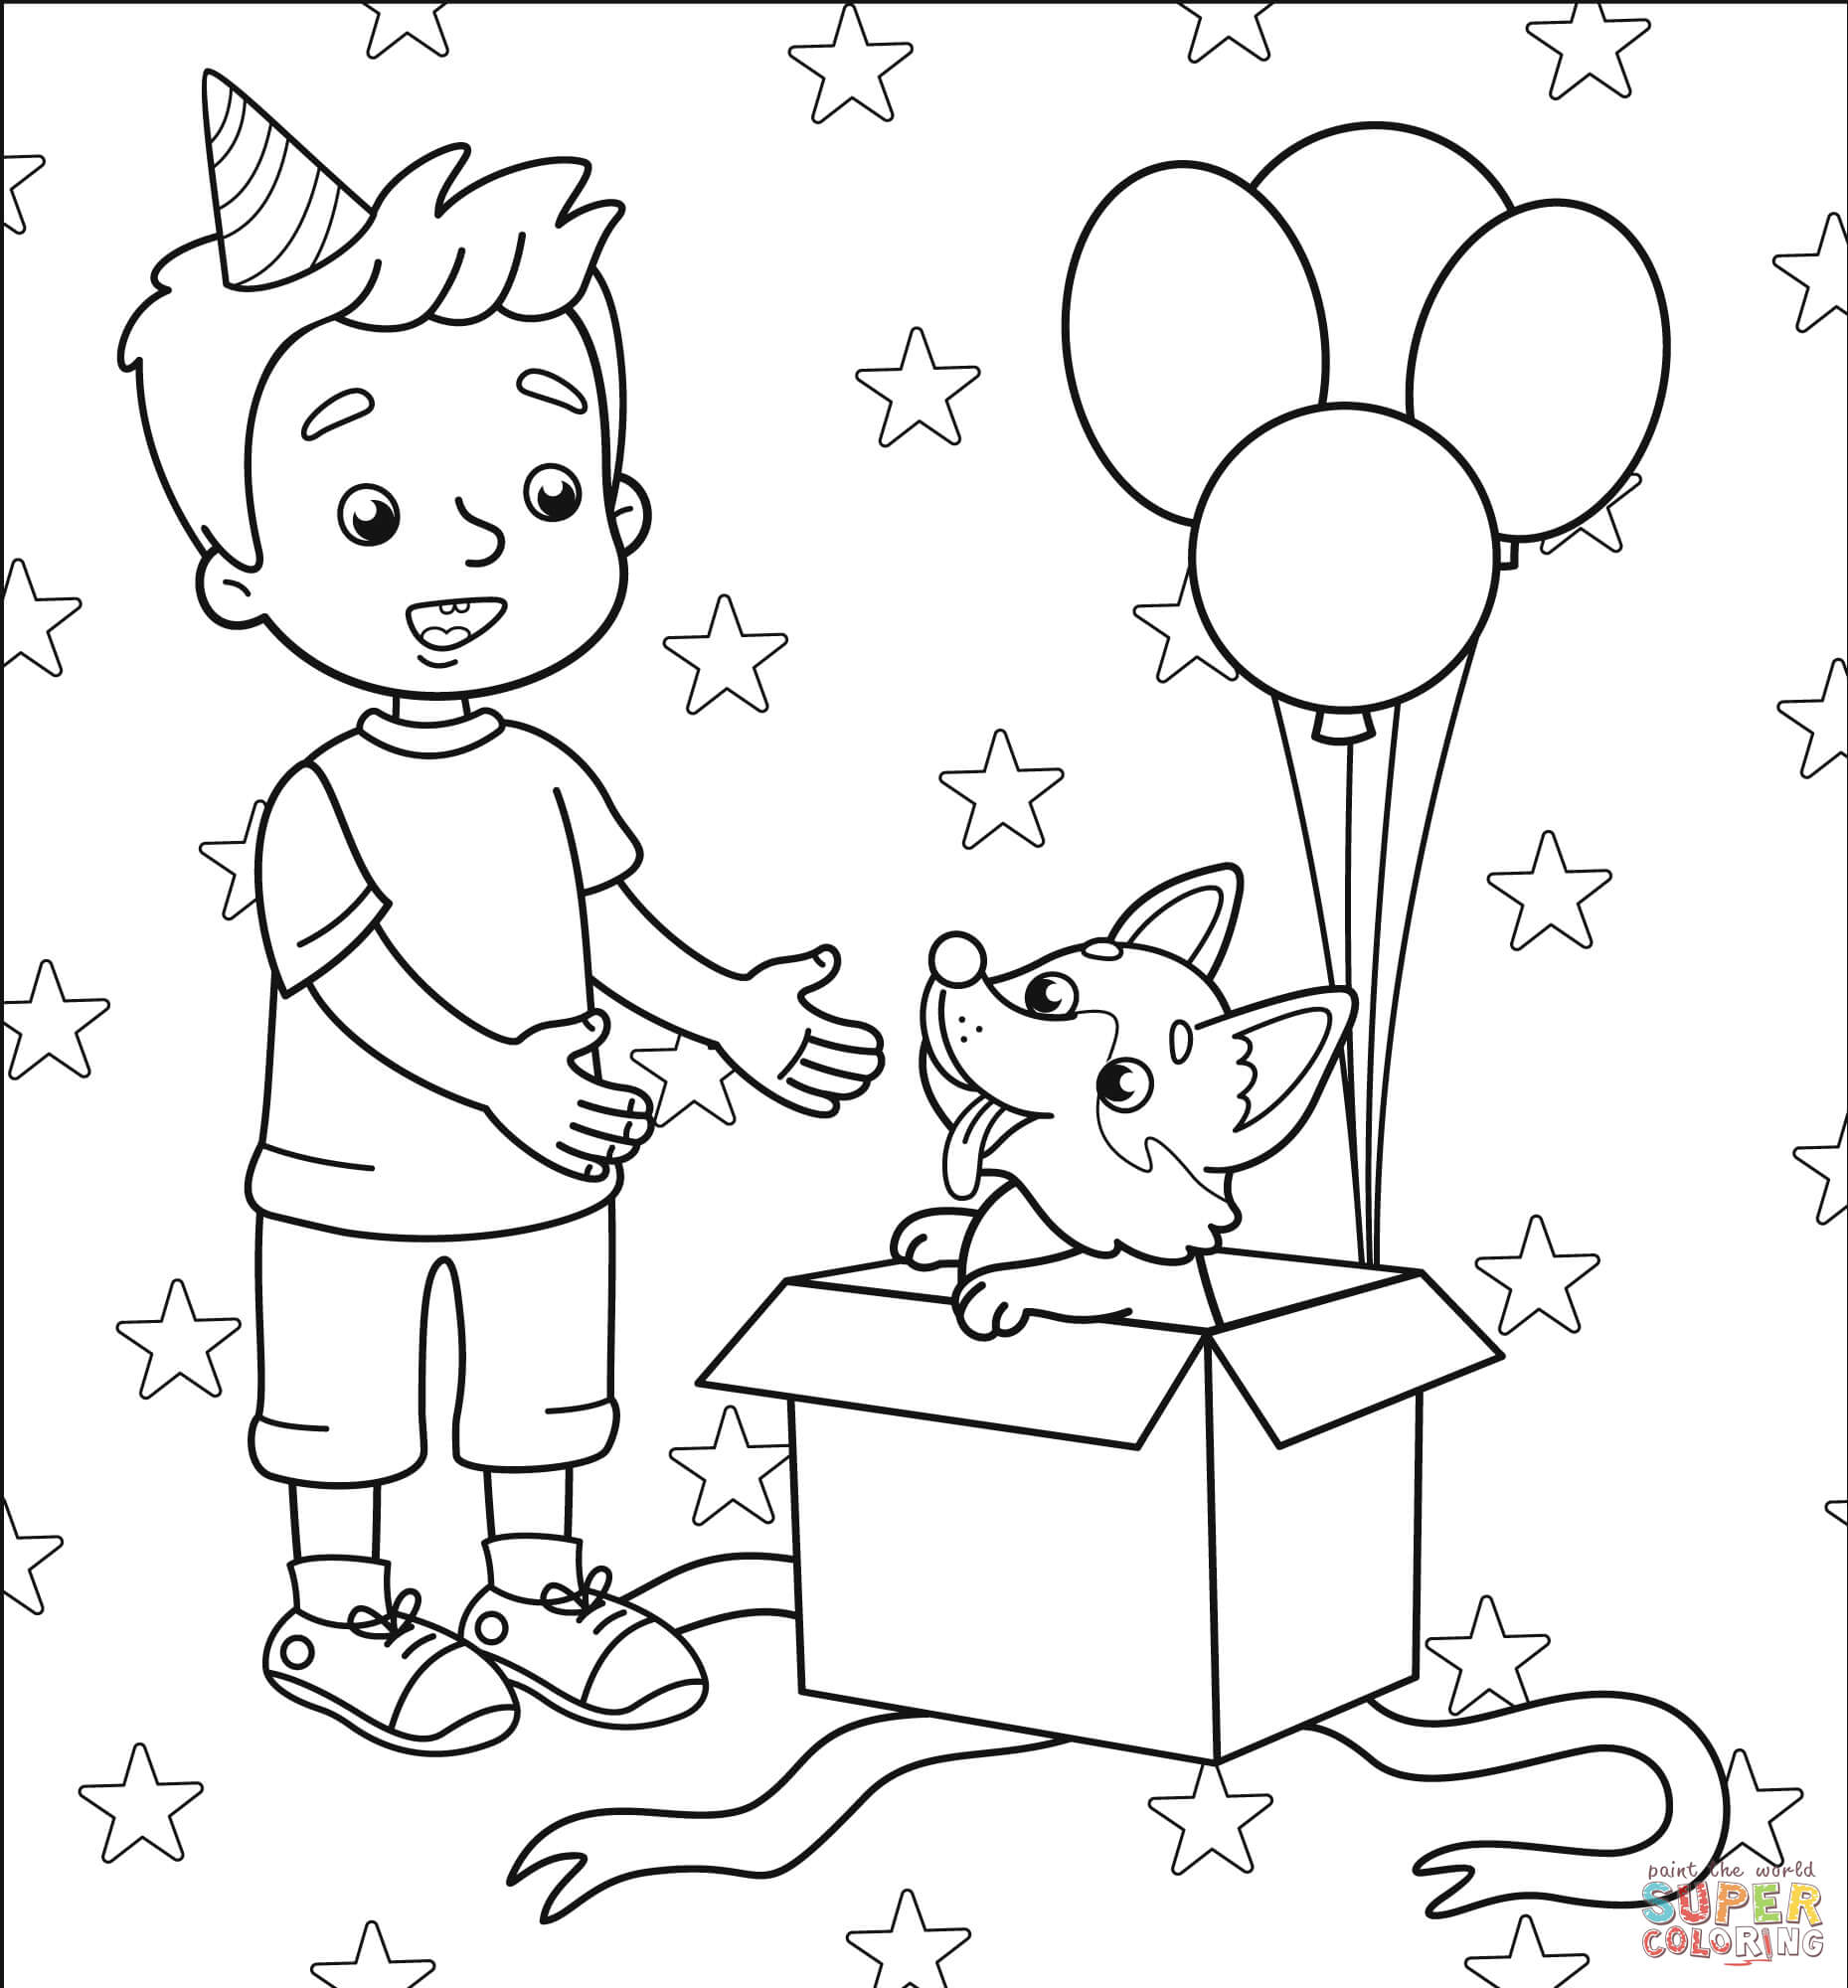 Happy Birthday Boy Coloring Pages - Coloring Home